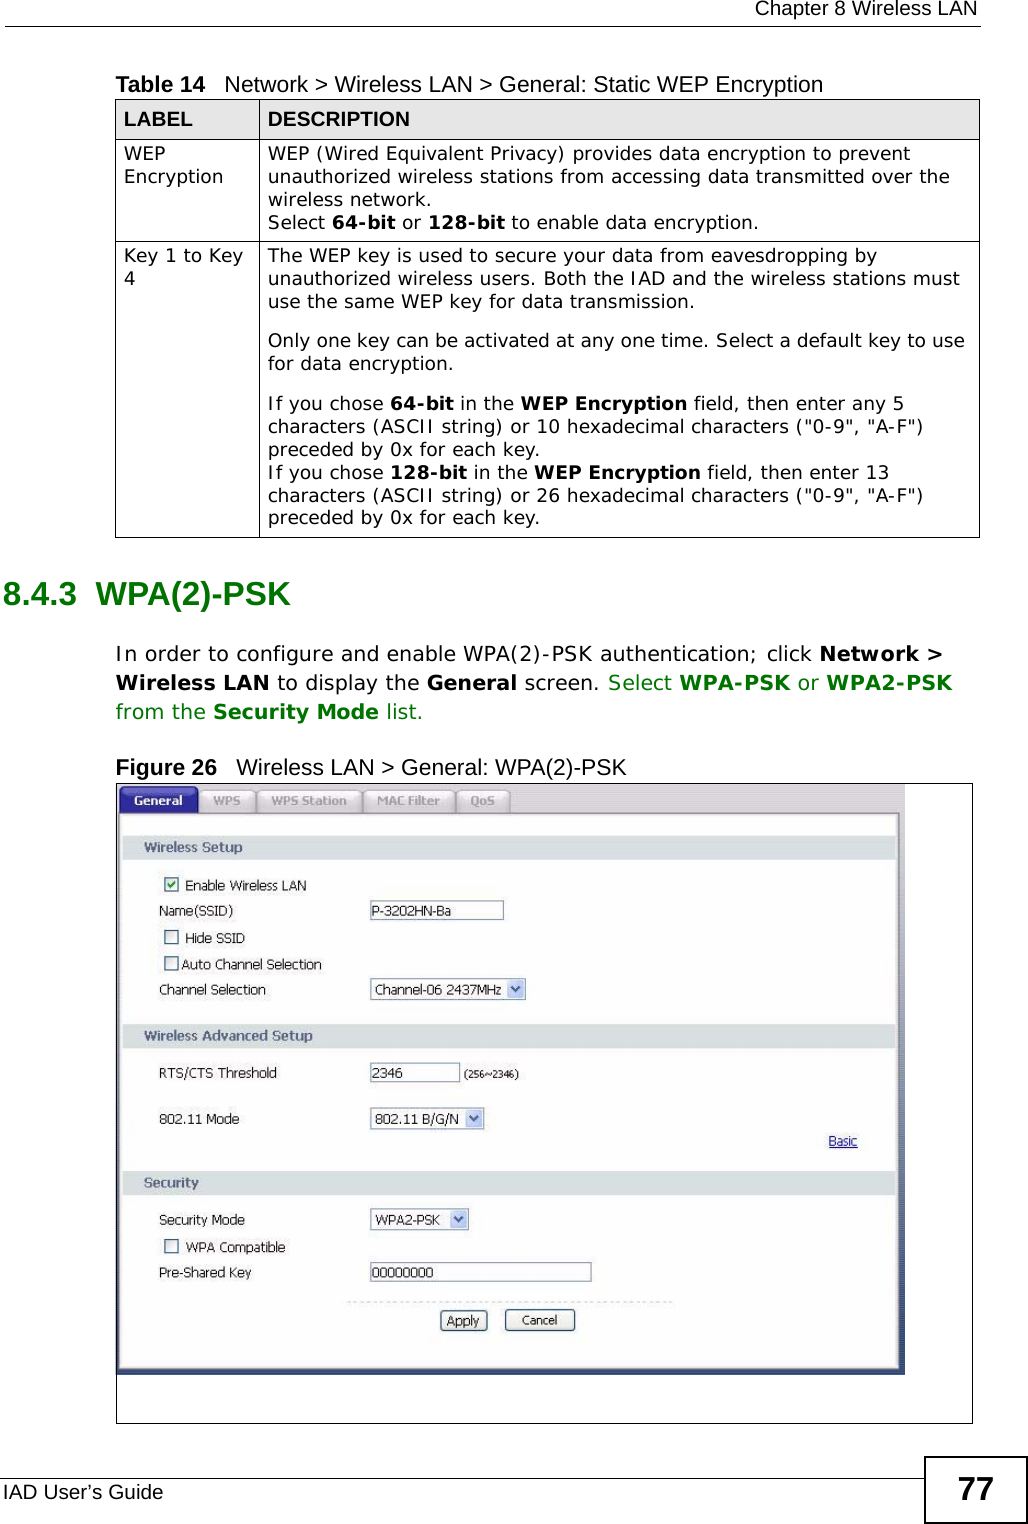  Chapter 8 Wireless LANIAD User’s Guide 778.4.3  WPA(2)-PSK In order to configure and enable WPA(2)-PSK authentication; click Network &gt; Wireless LAN to display the General screen. Select WPA-PSK or WPA2-PSK from the Security Mode list.Figure 26   Wireless LAN &gt; General: WPA(2)-PSKWEP Encryption WEP (Wired Equivalent Privacy) provides data encryption to prevent unauthorized wireless stations from accessing data transmitted over the wireless network. Select 64-bit or 128-bit to enable data encryption.  Key 1 to Key 4The WEP key is used to secure your data from eavesdropping by unauthorized wireless users. Both the IAD and the wireless stations must use the same WEP key for data transmission.Only one key can be activated at any one time. Select a default key to use for data encryption.If you chose 64-bit in the WEP Encryption field, then enter any 5 characters (ASCII string) or 10 hexadecimal characters (&quot;0-9&quot;, &quot;A-F&quot;) preceded by 0x for each key.If you chose 128-bit in the WEP Encryption field, then enter 13 characters (ASCII string) or 26 hexadecimal characters (&quot;0-9&quot;, &quot;A-F&quot;) preceded by 0x for each key.Table 14   Network &gt; Wireless LAN &gt; General: Static WEP EncryptionLABEL DESCRIPTION